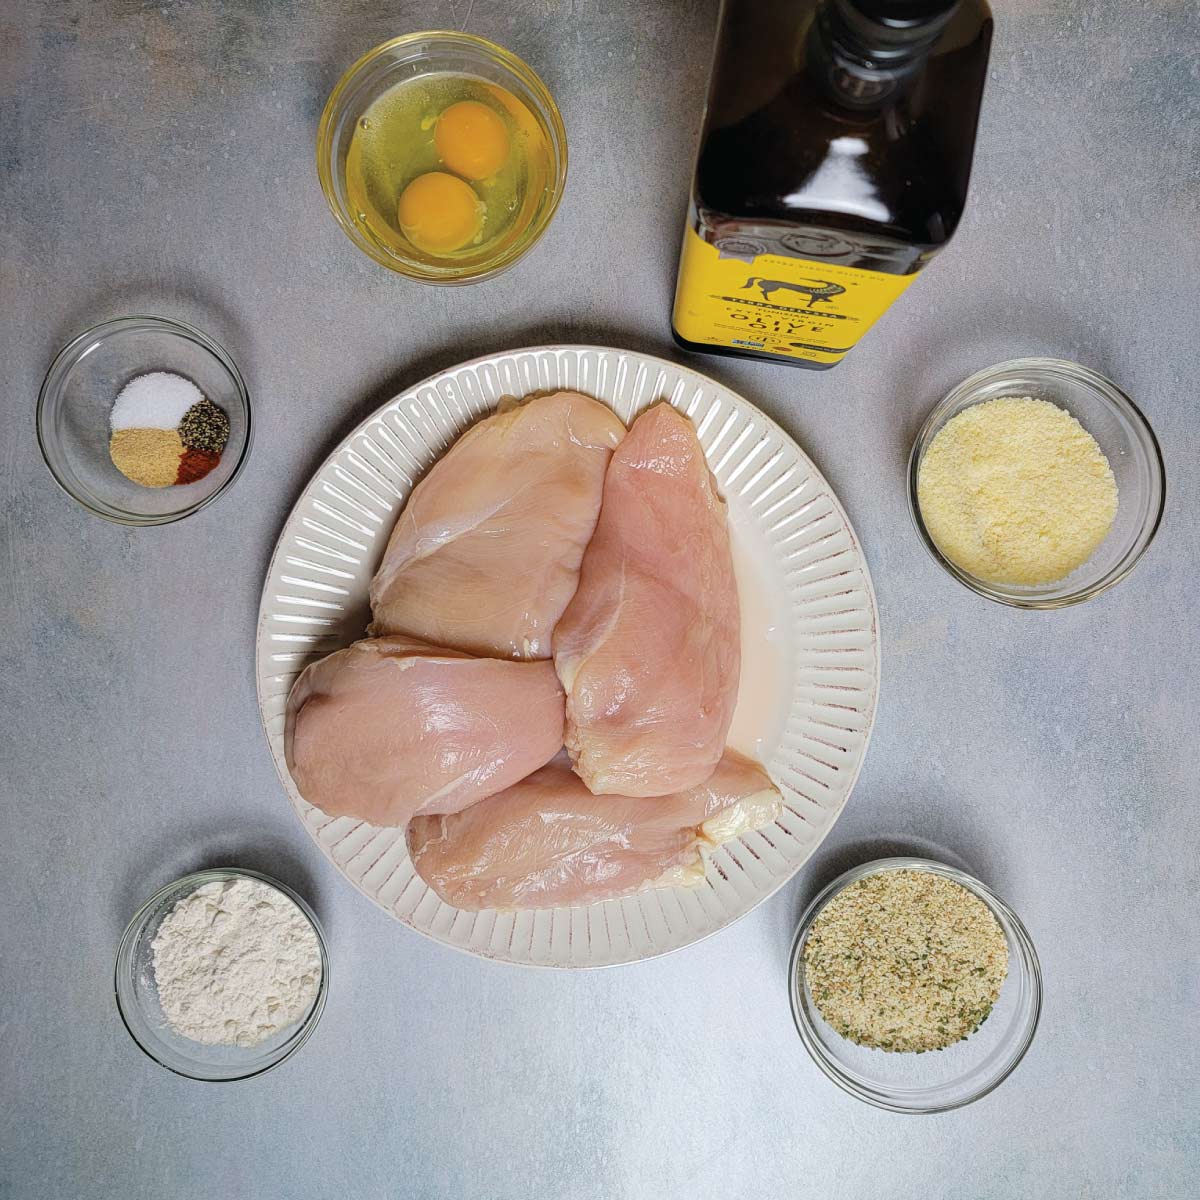 Ingredients for making the fried chicken prepped - flour, bread crumbs, chicken breasts, parmesan cheese, olive oil, eggs, salt, garlic, pepper and cayenne pepper.